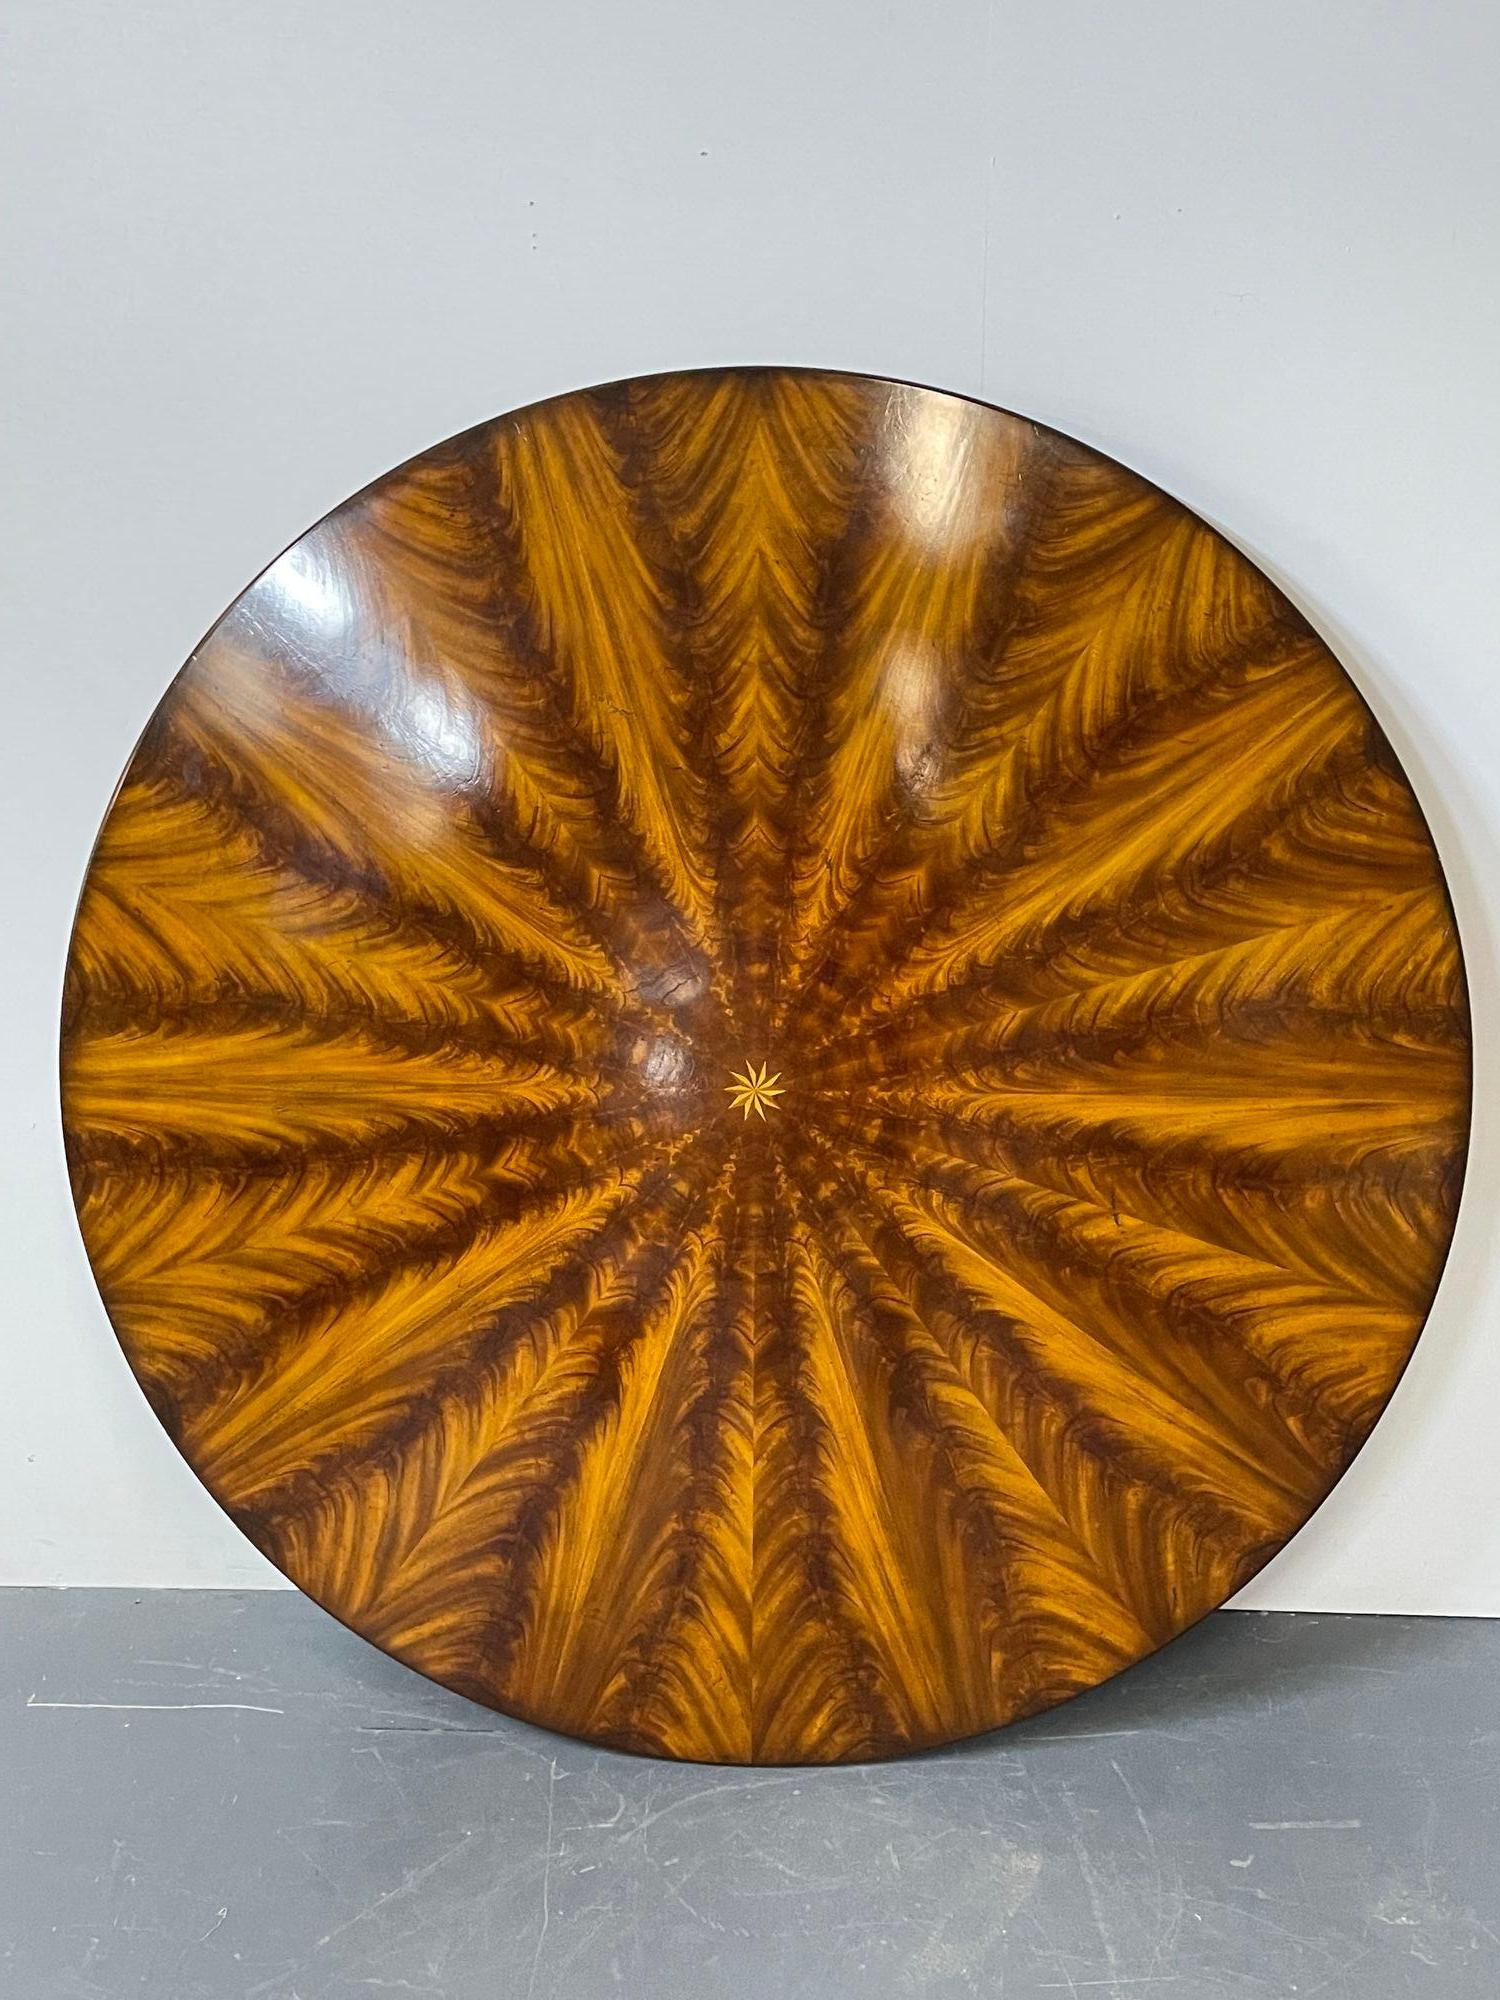 Georgian style circular sunburst dining / center table, conference table, flame mahogany, expands.

A magnificent dining or center table of flame mahogany that sits 64 inches round, with the ability to expand to 87.5 inches, in the Georgian Style.